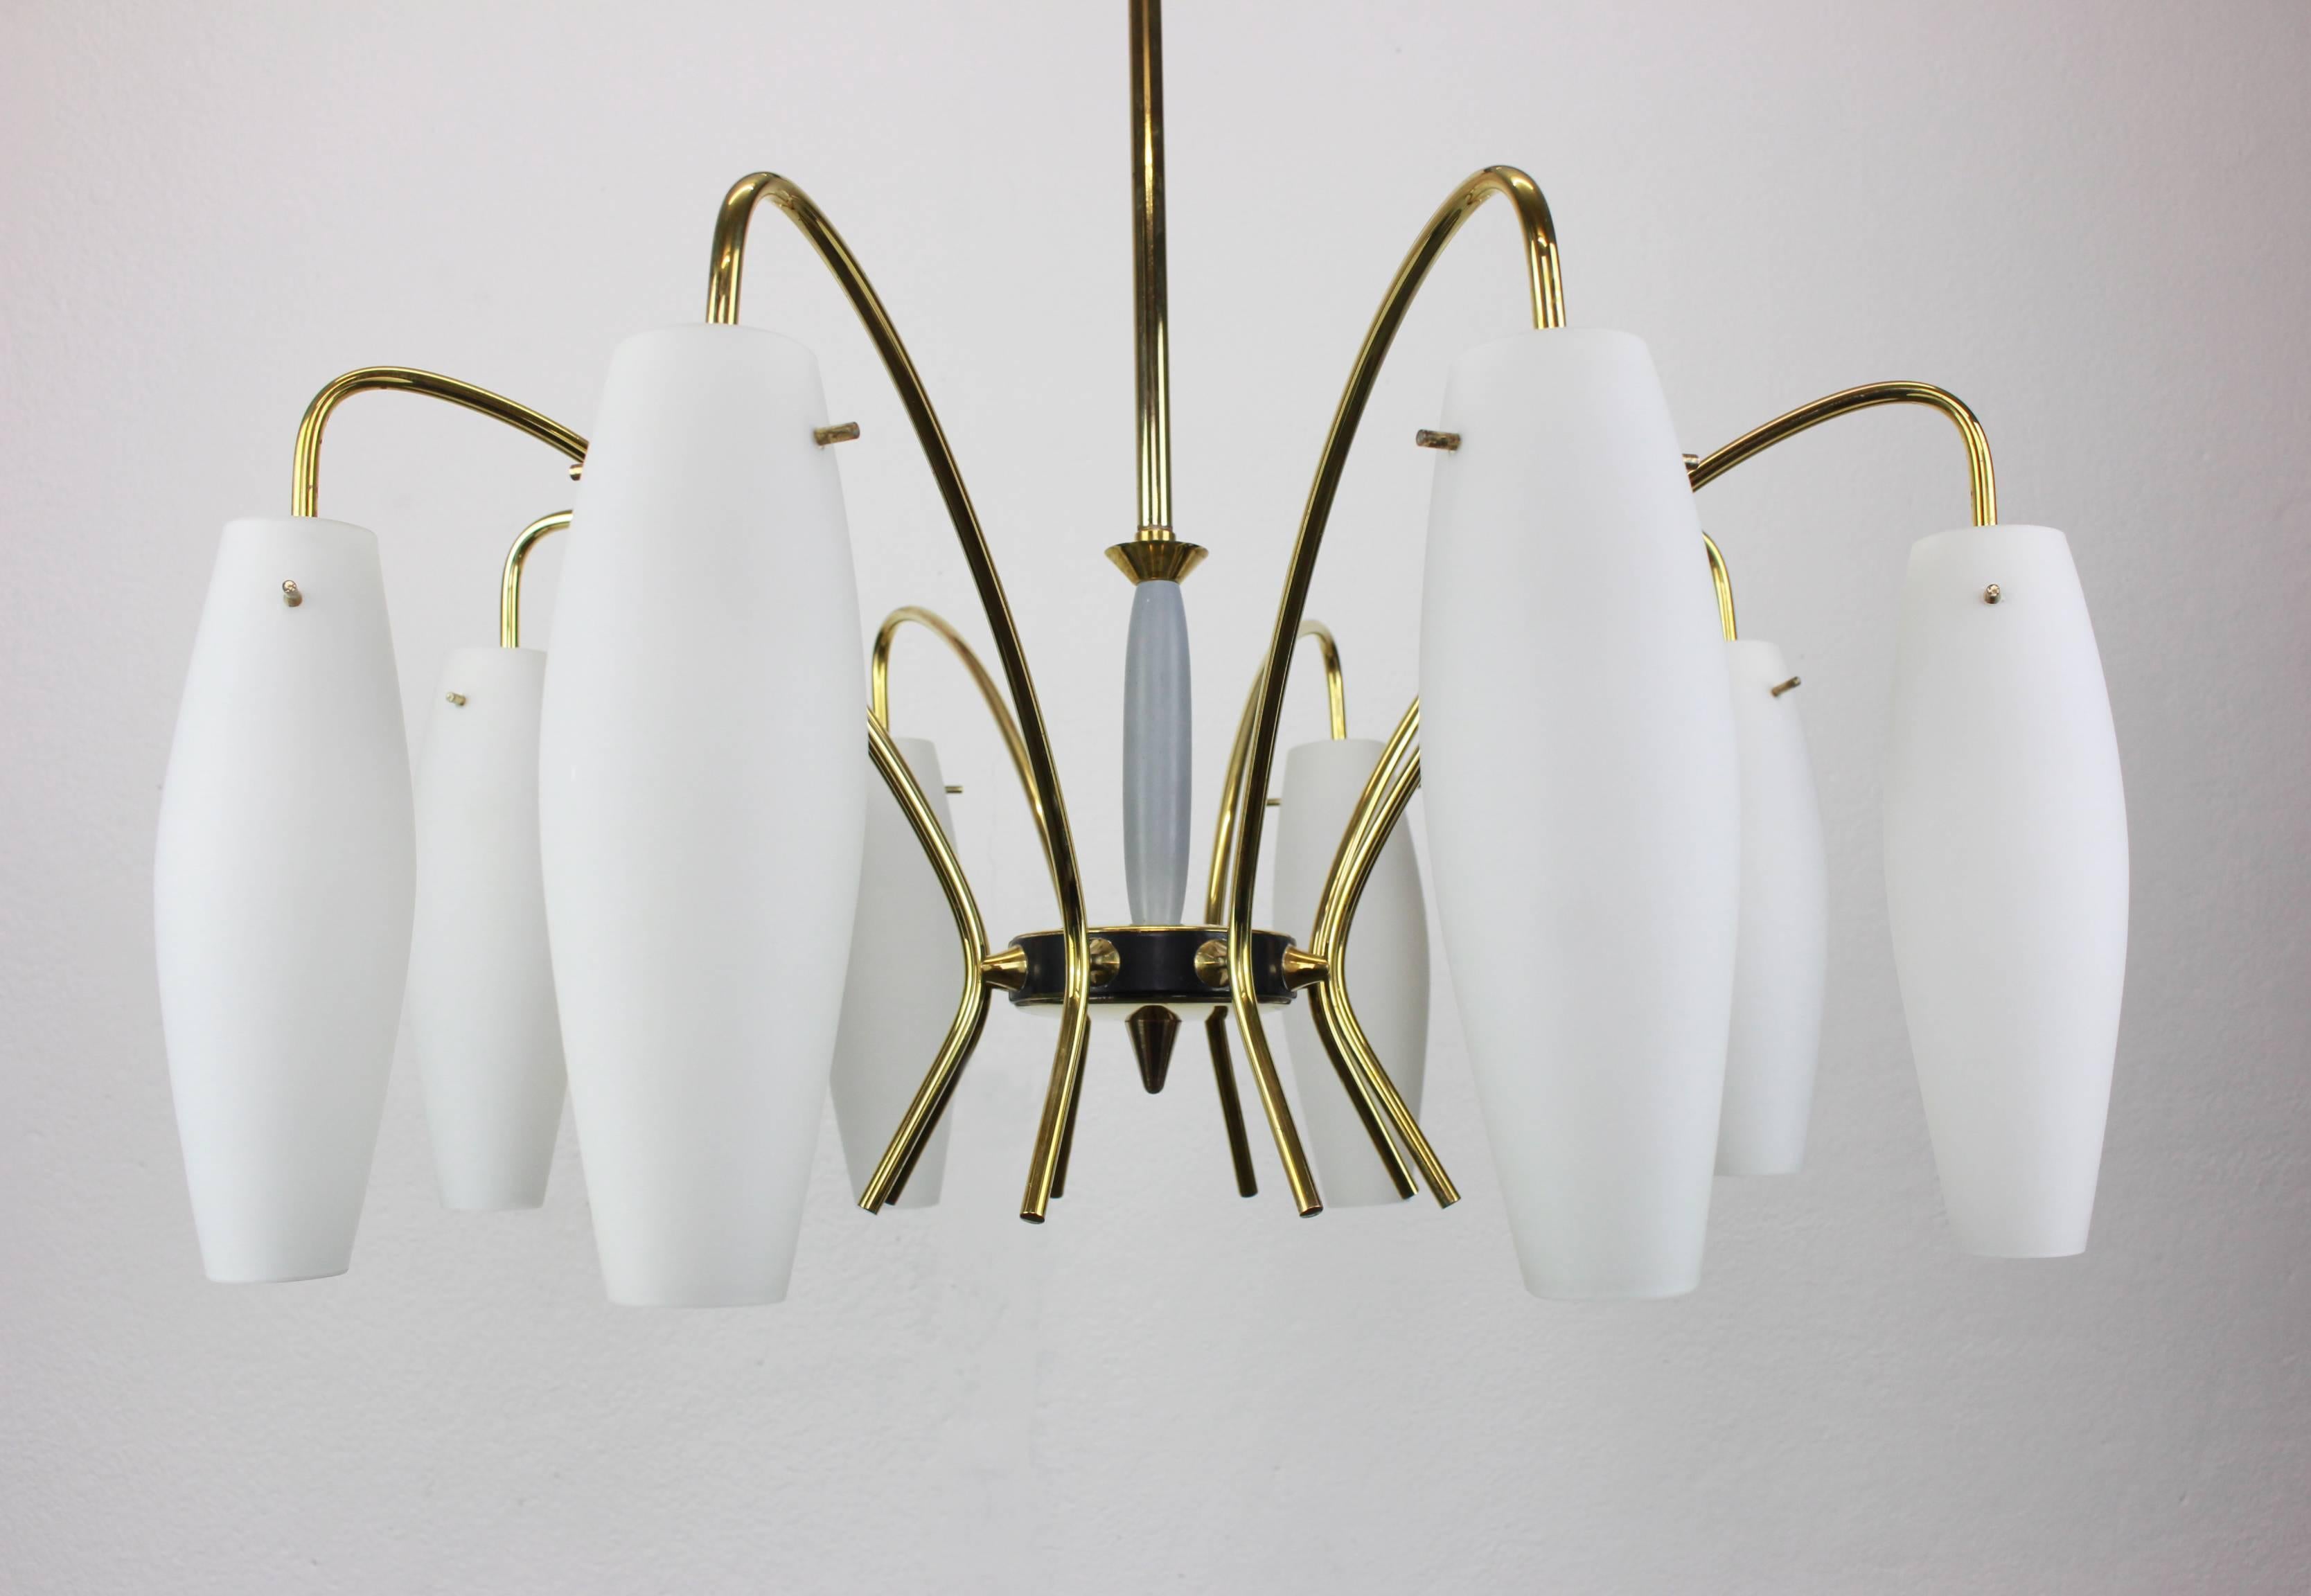 A stunning eight lights chandelier in the manner of Stilnovo, Italy, manufactured in circa 1950-59. A handmade and high-quality piece.

High quality and in very good condition. Cleaned, well-wired and ready to use. 

The fixture requires 8 x E14